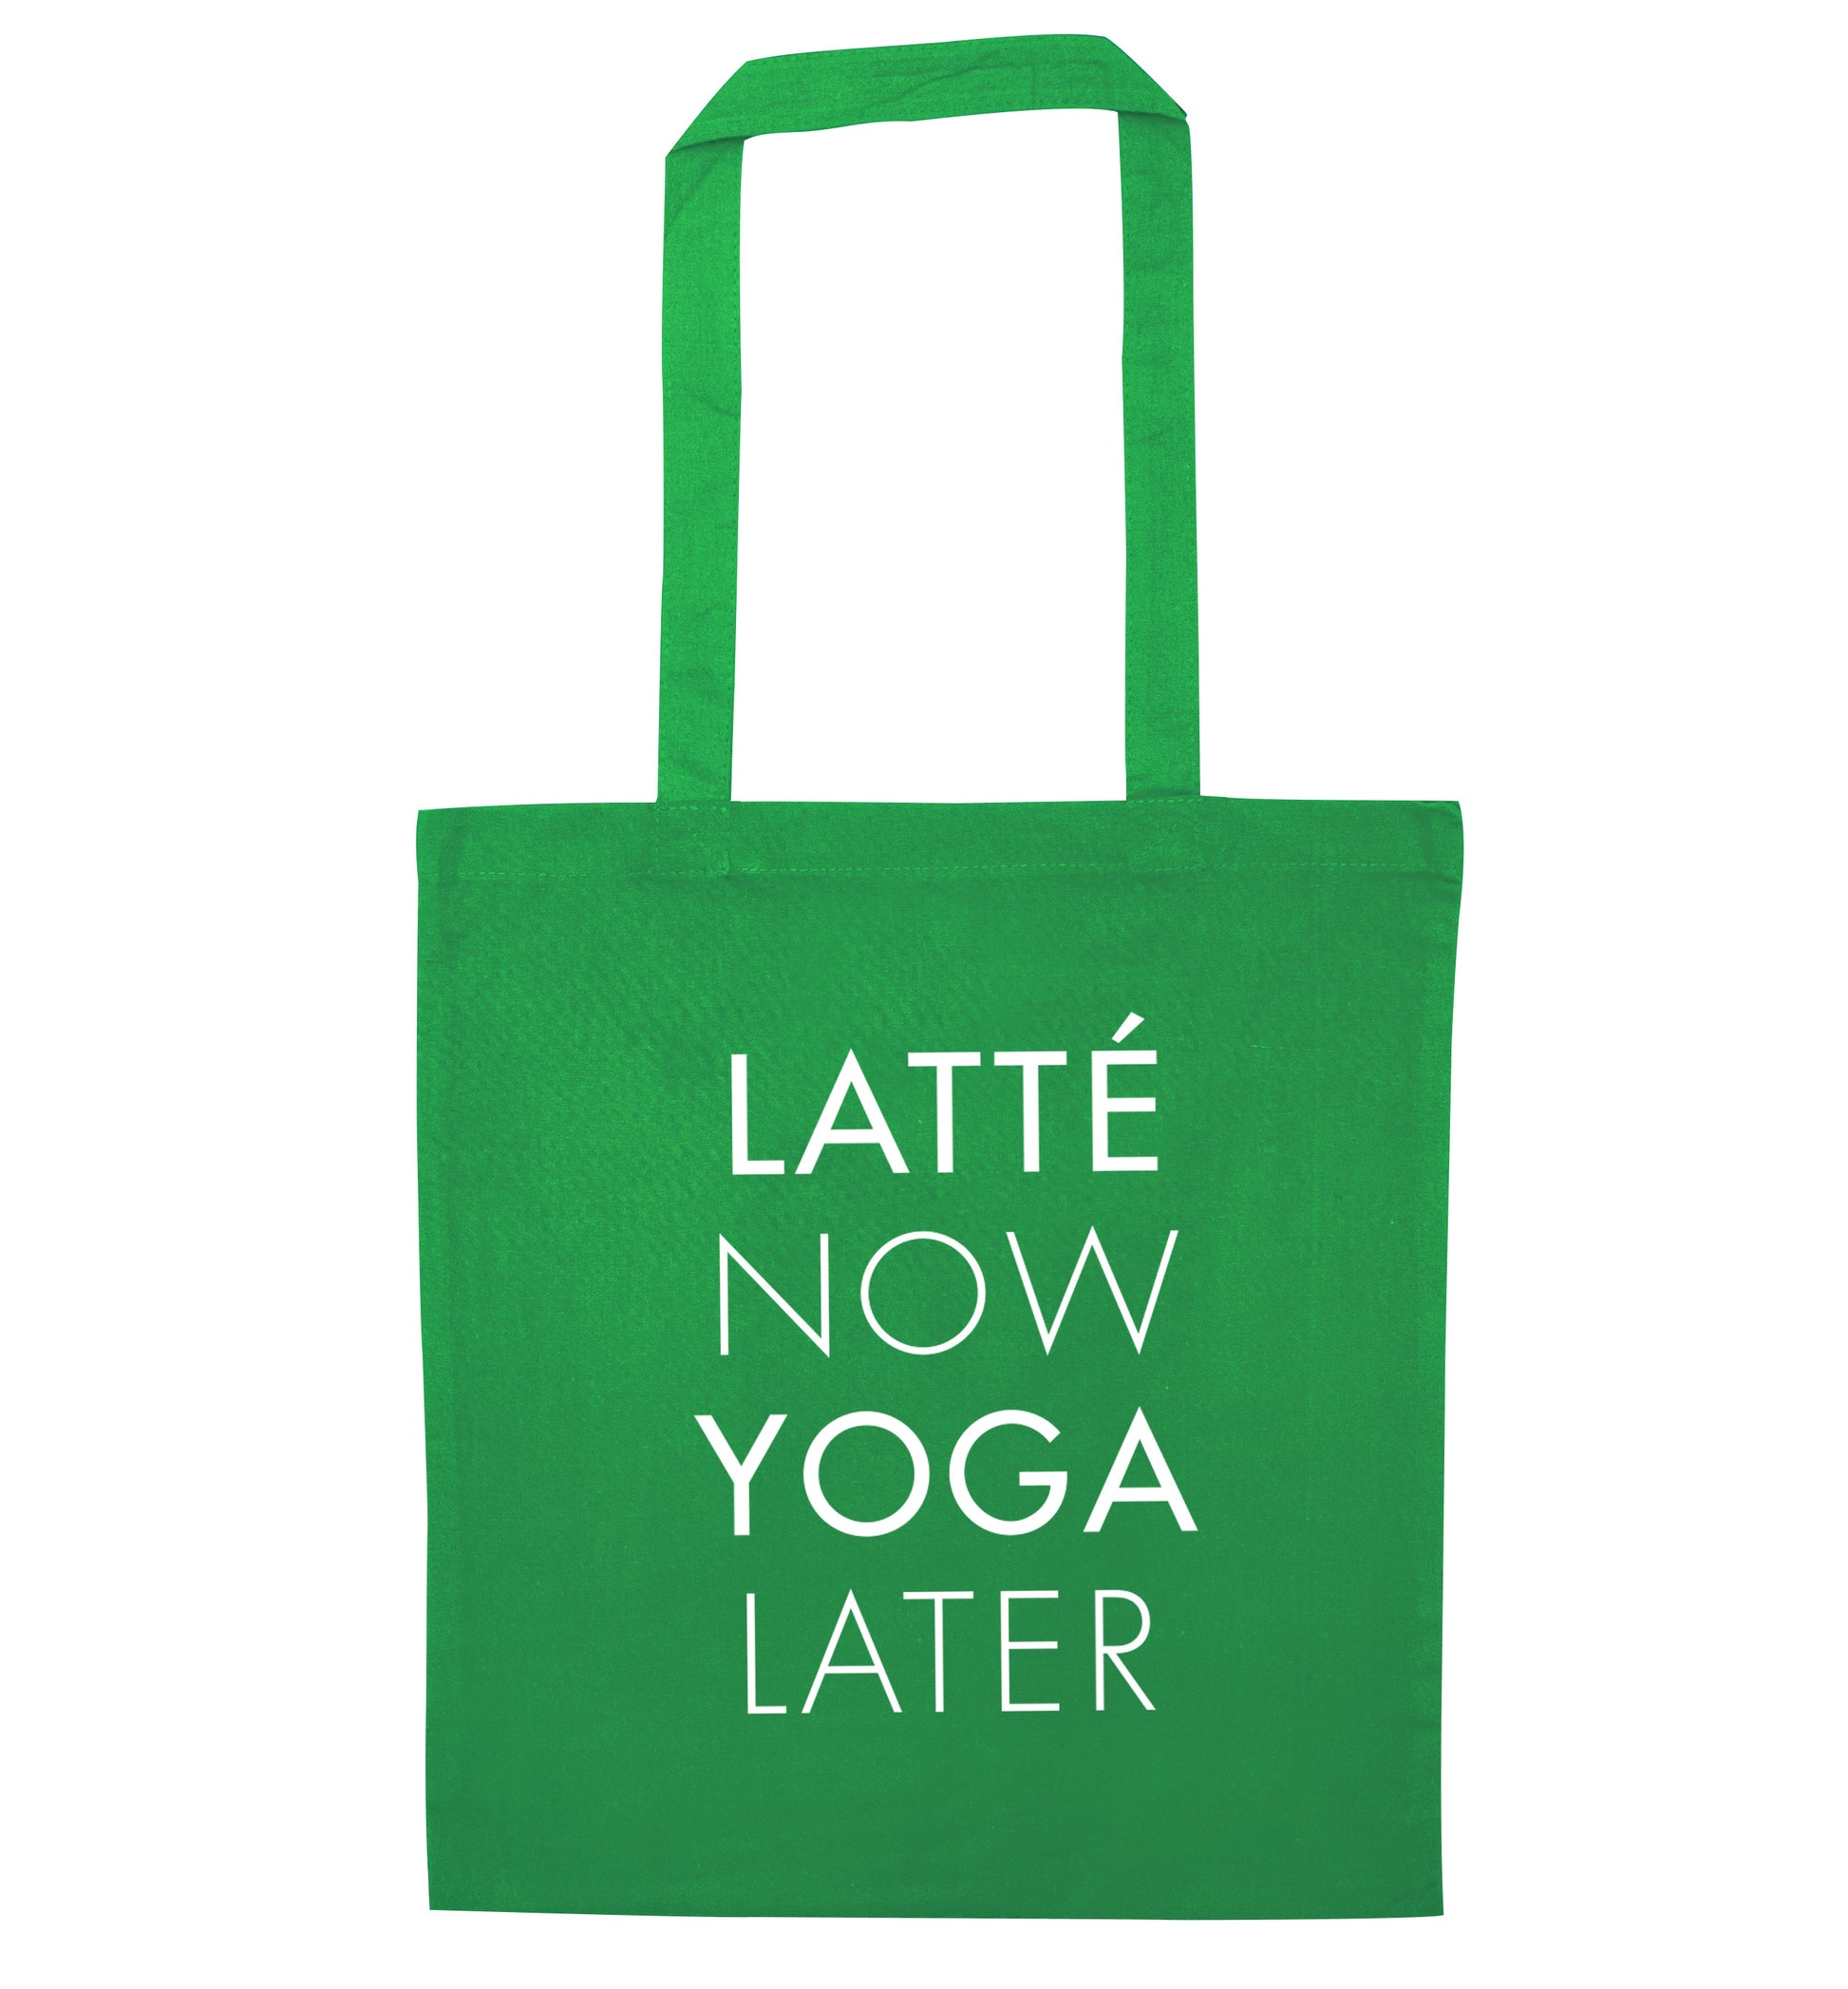 Latte now yoga later green tote bag